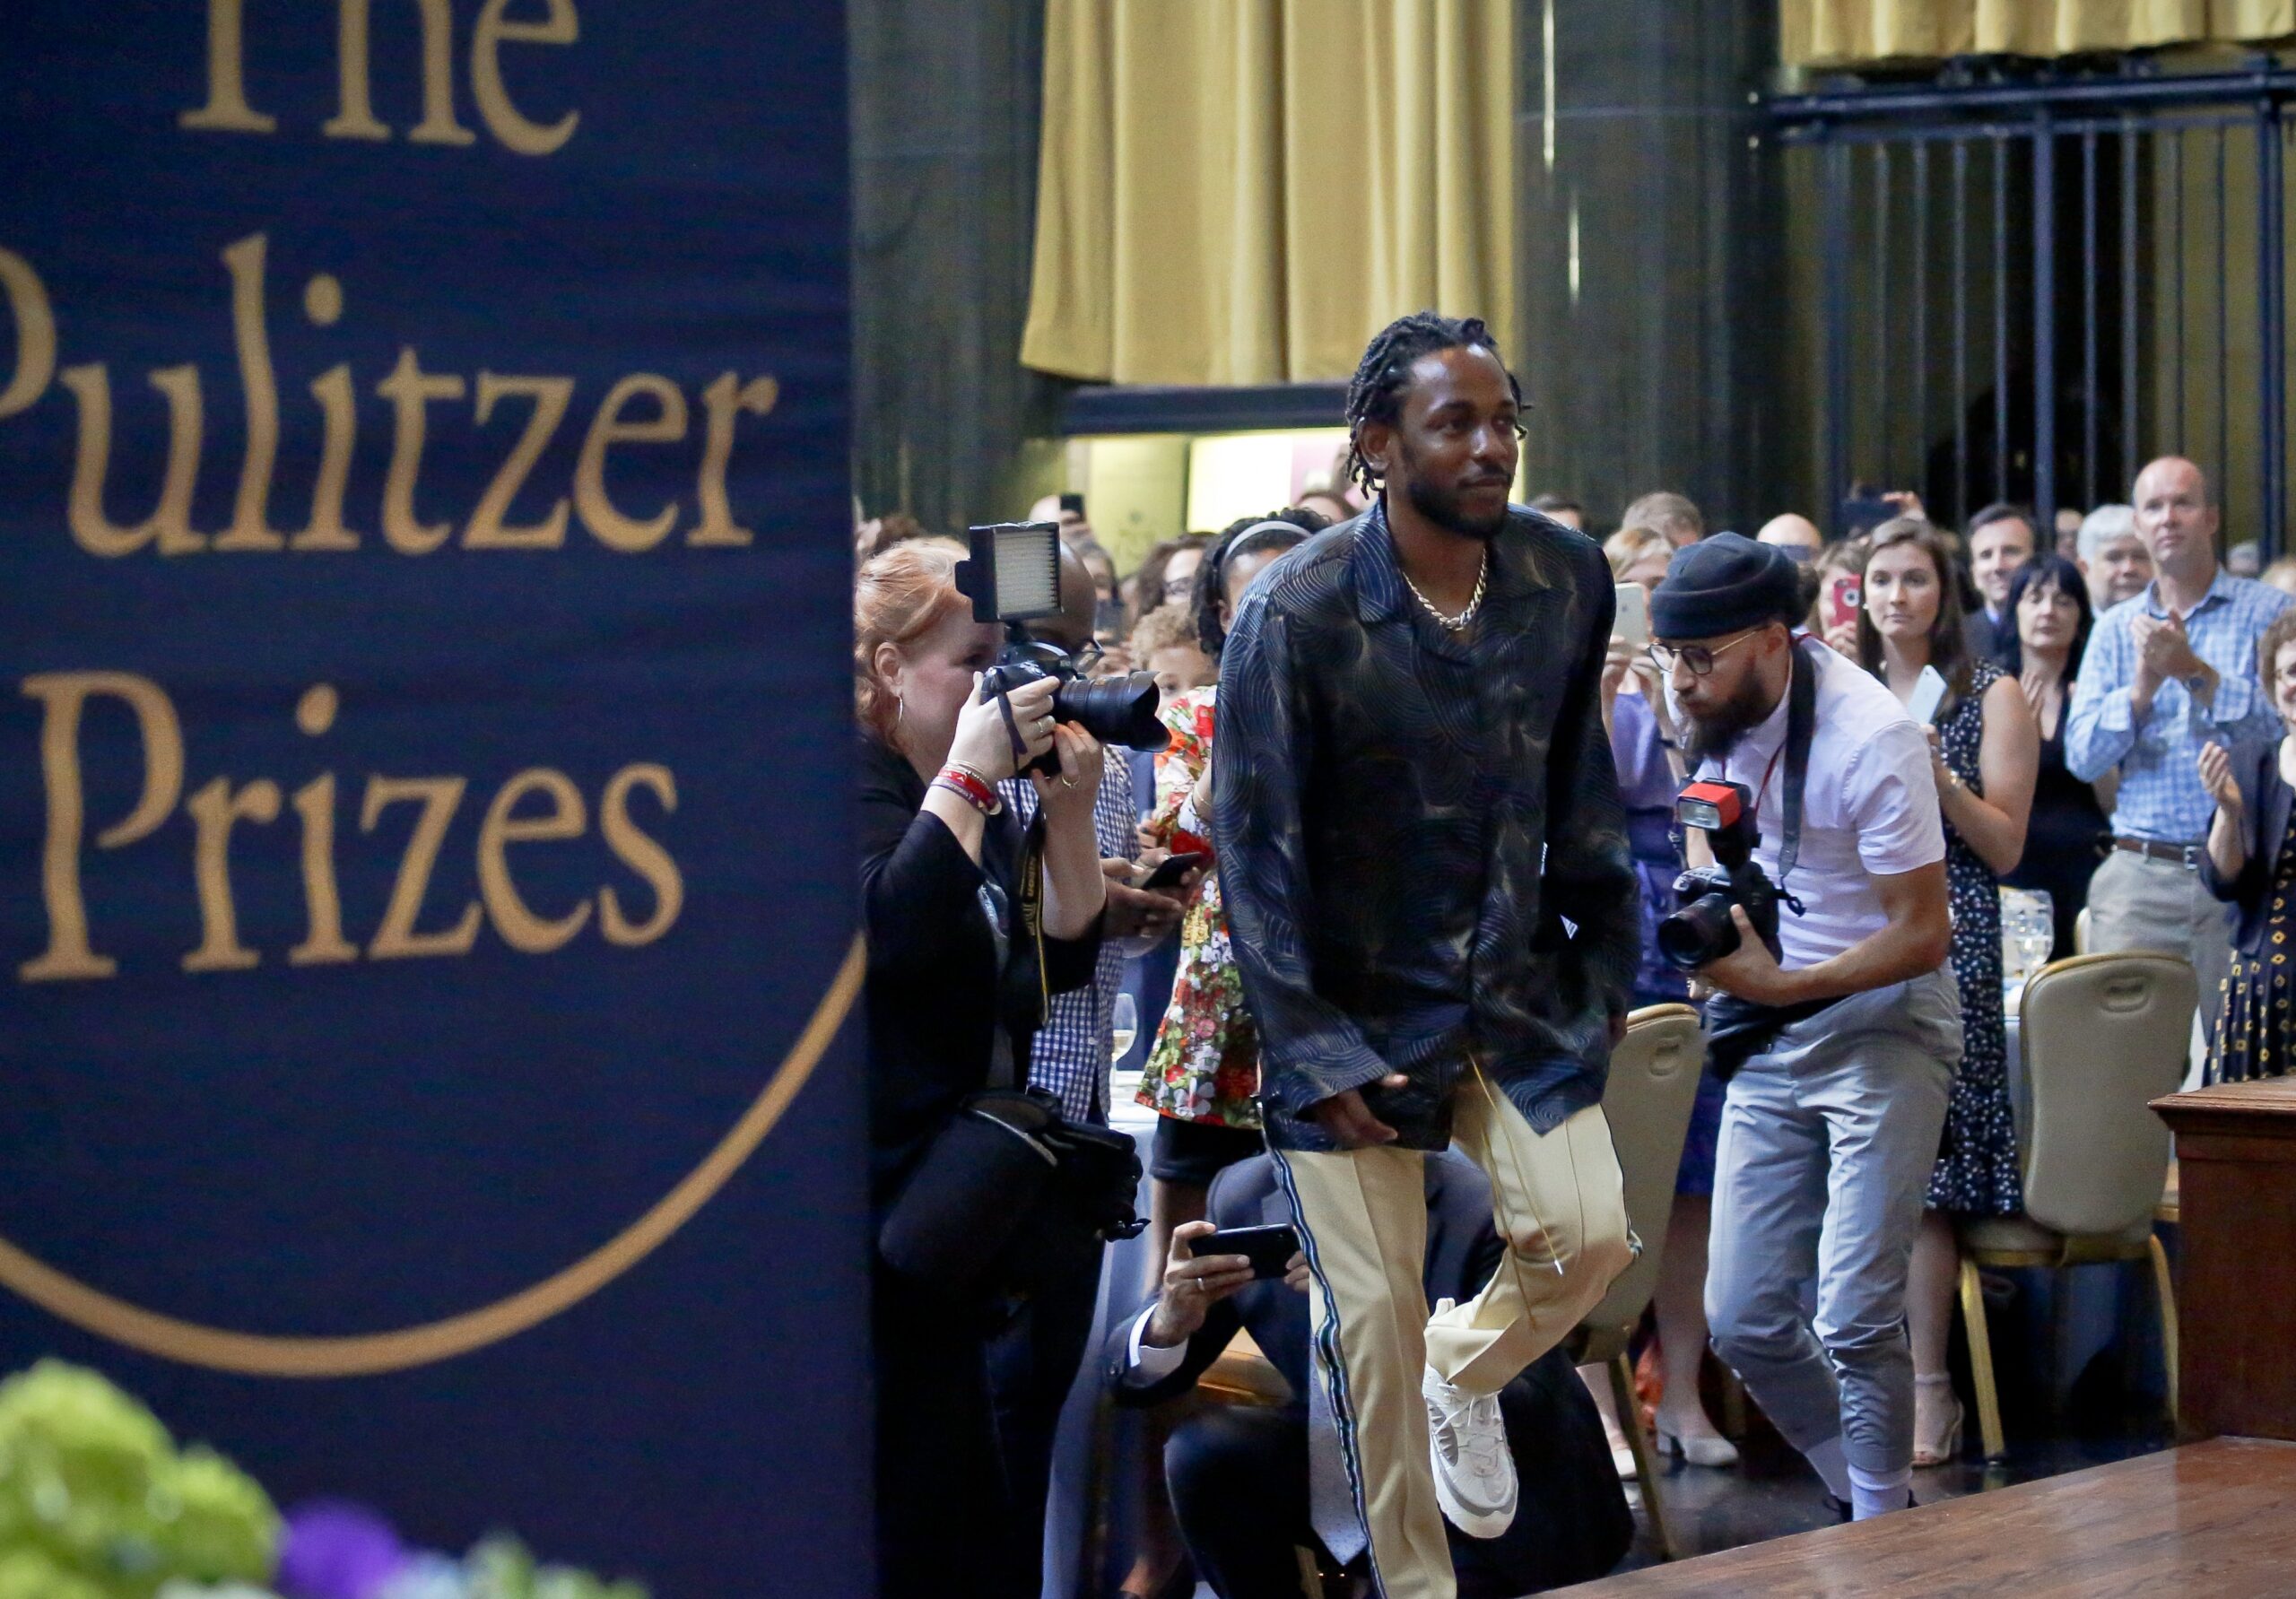 Pulitzer Prize winner for music Kendrick Lamar walks onto the stage to accept his award